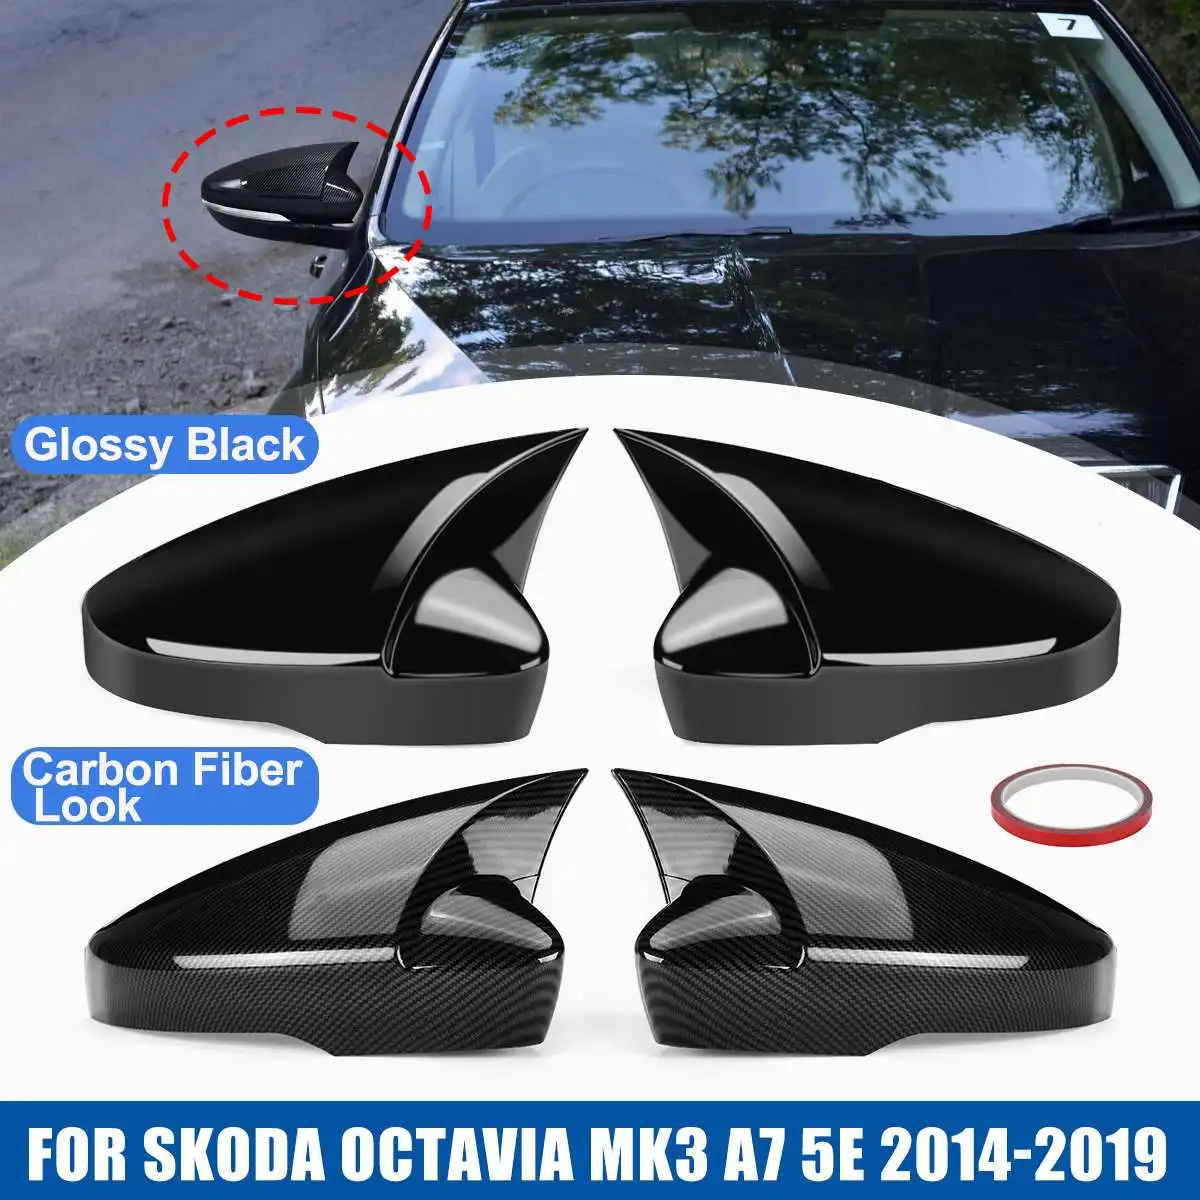 

Add-On Rearview Side Mirror Covers Cap For Skoda For Octavia Mk3 A7 5E 2014-2019 Accessories Carbon Fiber Glossy Black